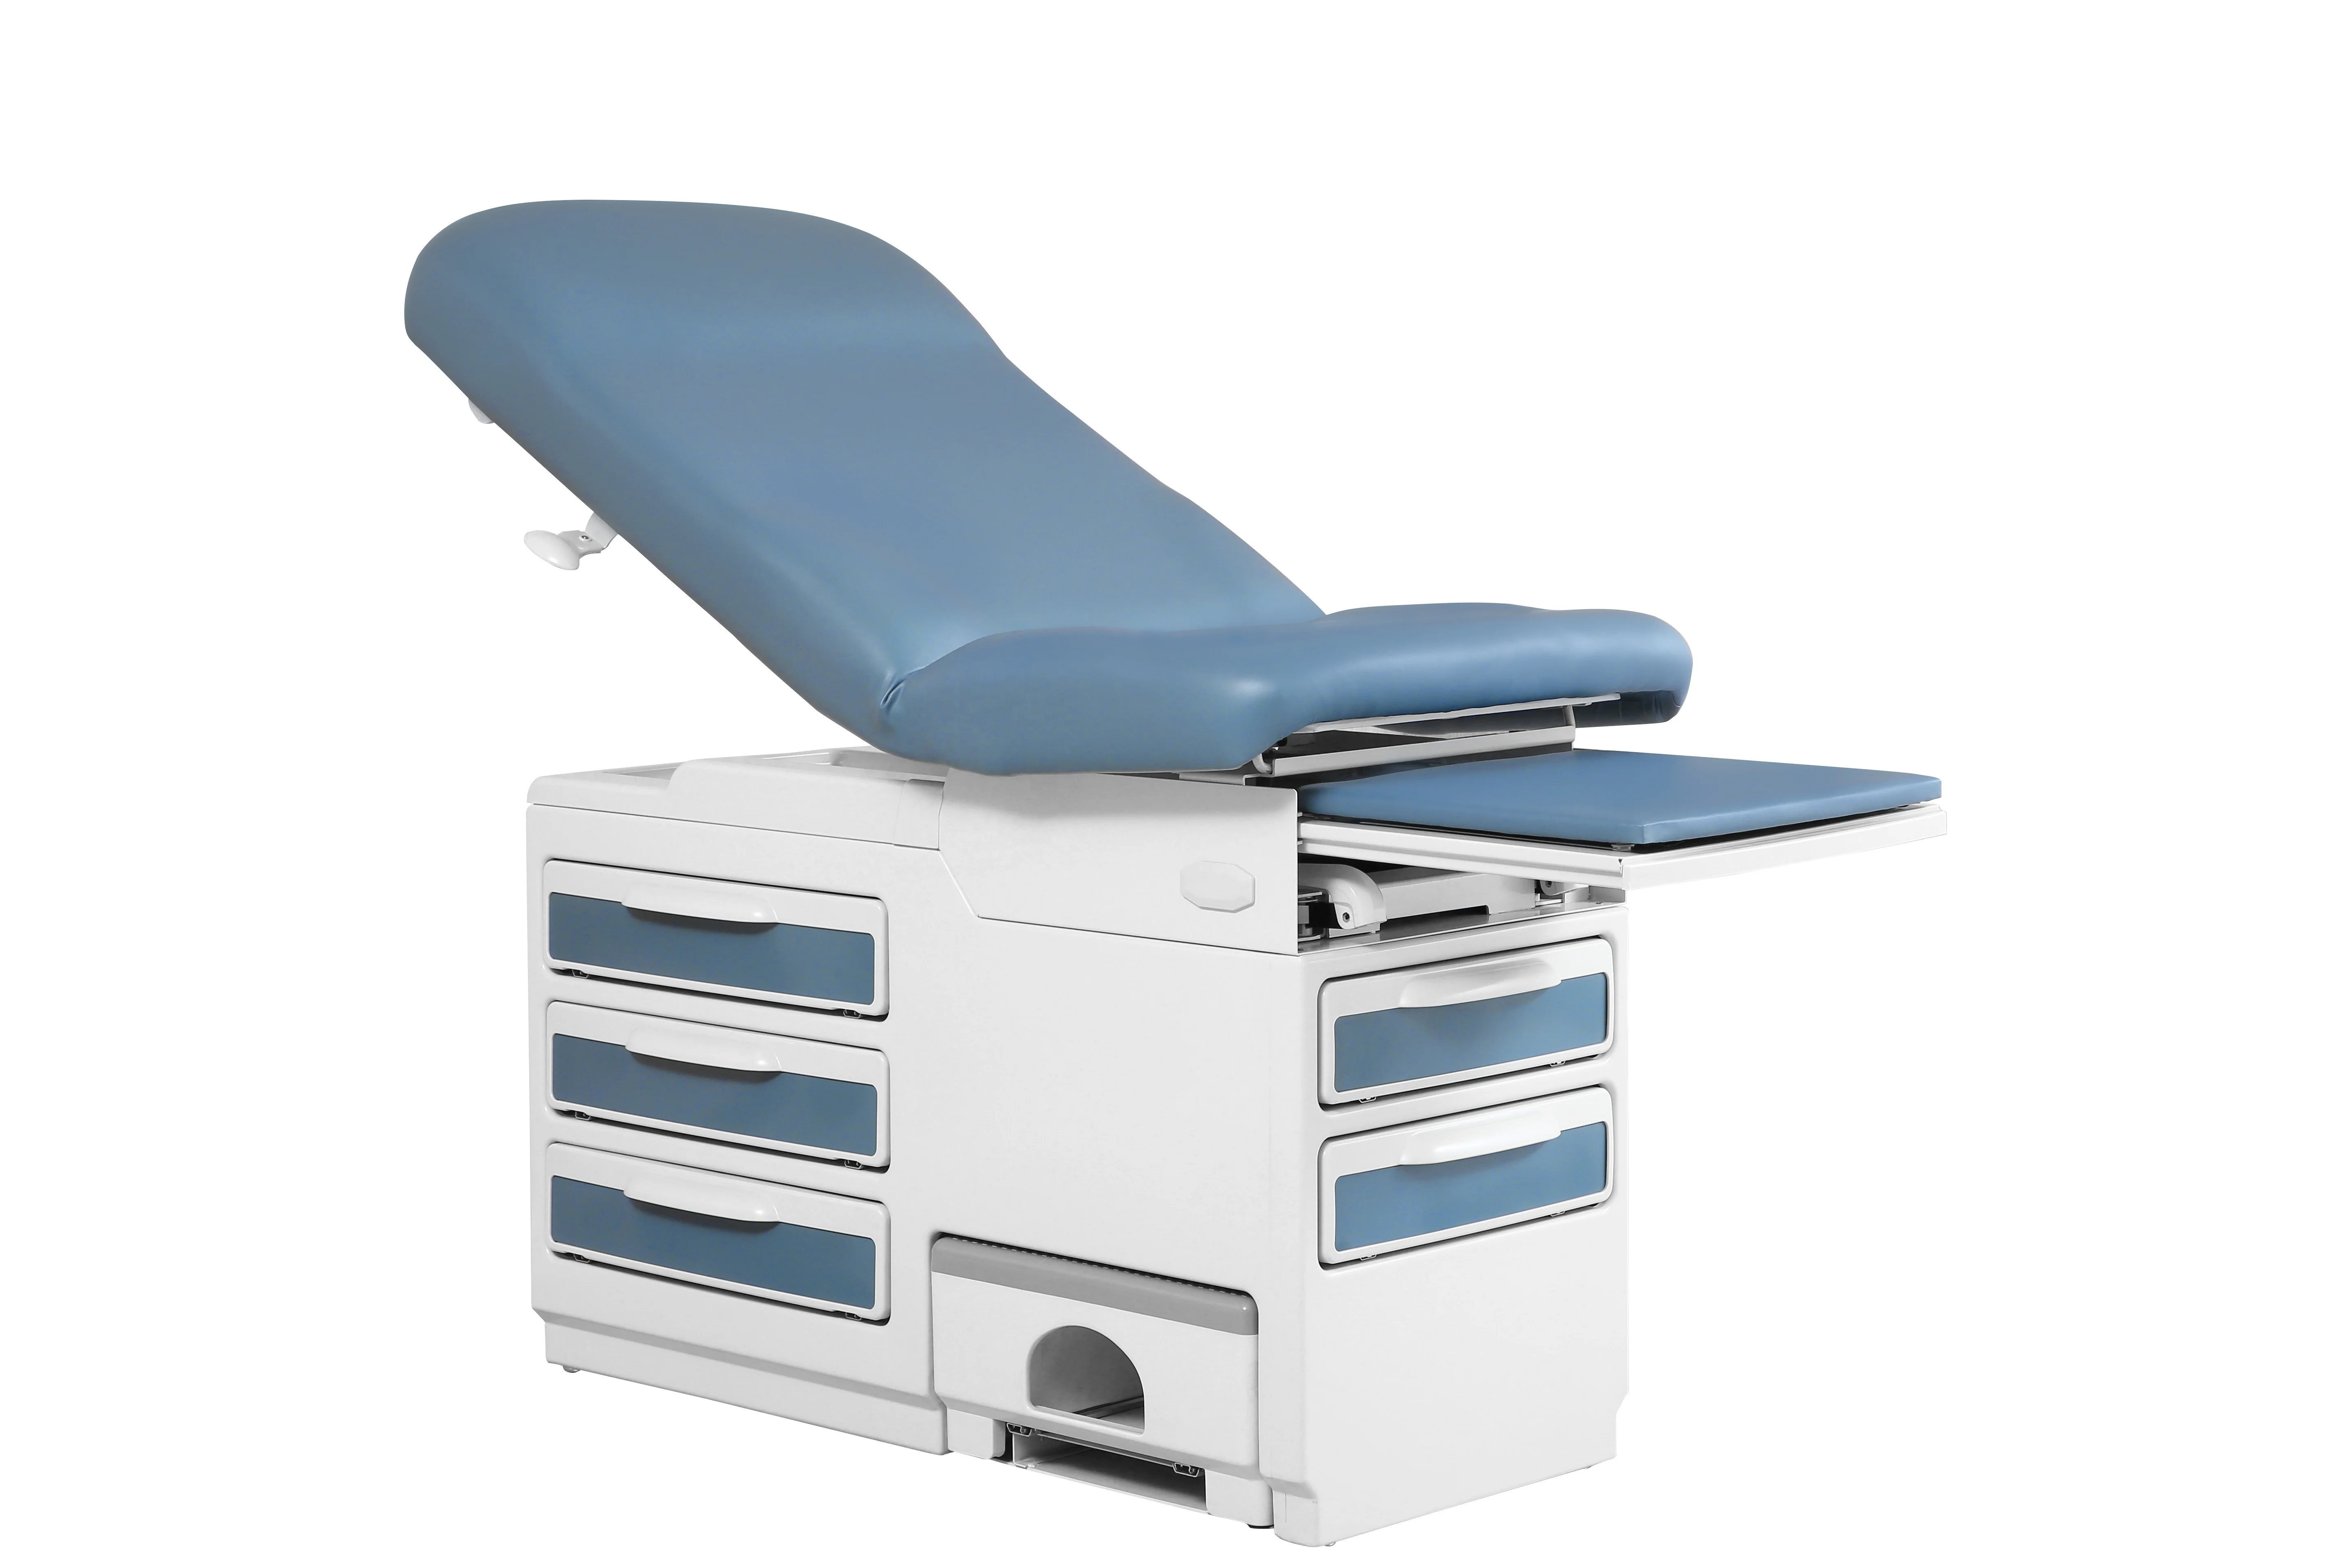 Adjustable delivery bed with drawers gynecological exam table Medical Gynecological obstetric delivery bed couch for wholesale